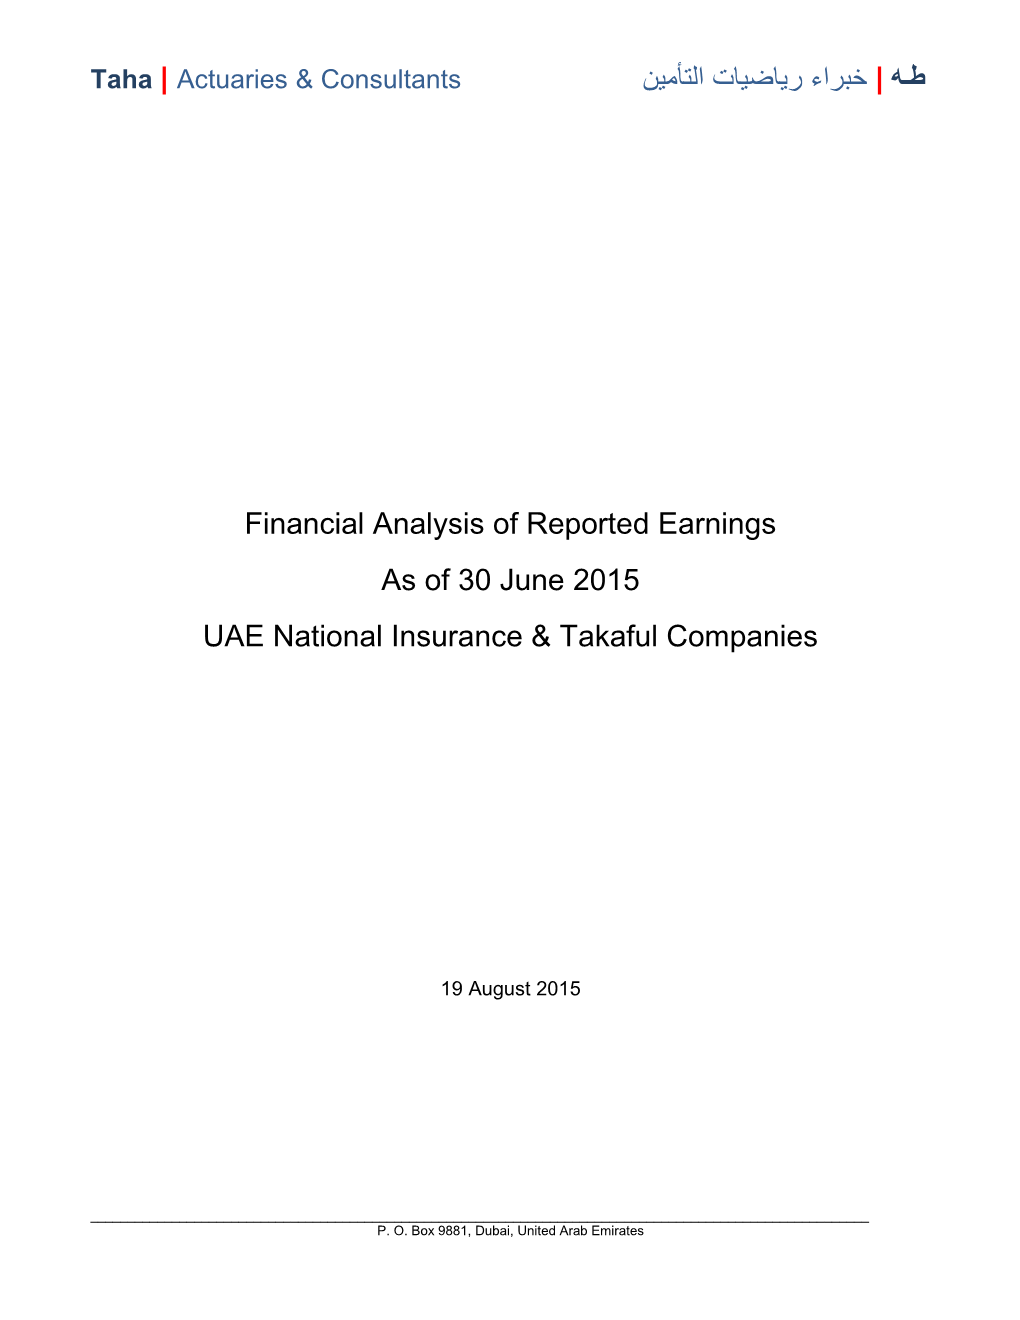 Download Financial Statements Analysis As of 30 June 2015 Final.Pdf